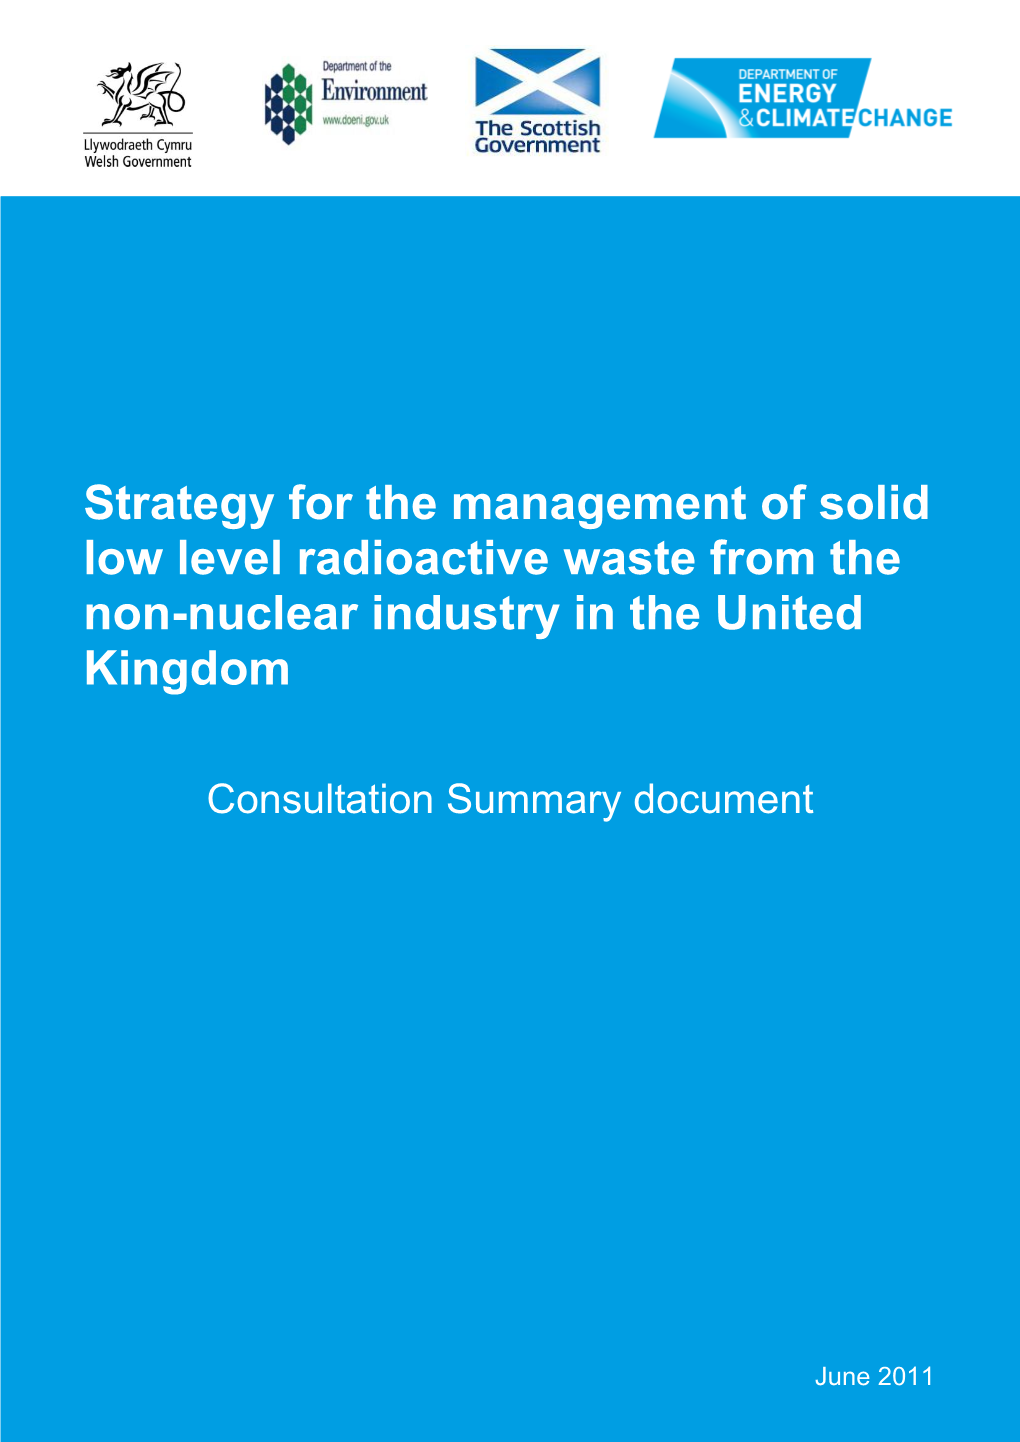 Strategy for the Management of Solid Low Level Radioactive Waste from the Non-Nuclear Industry in the United Kingdom